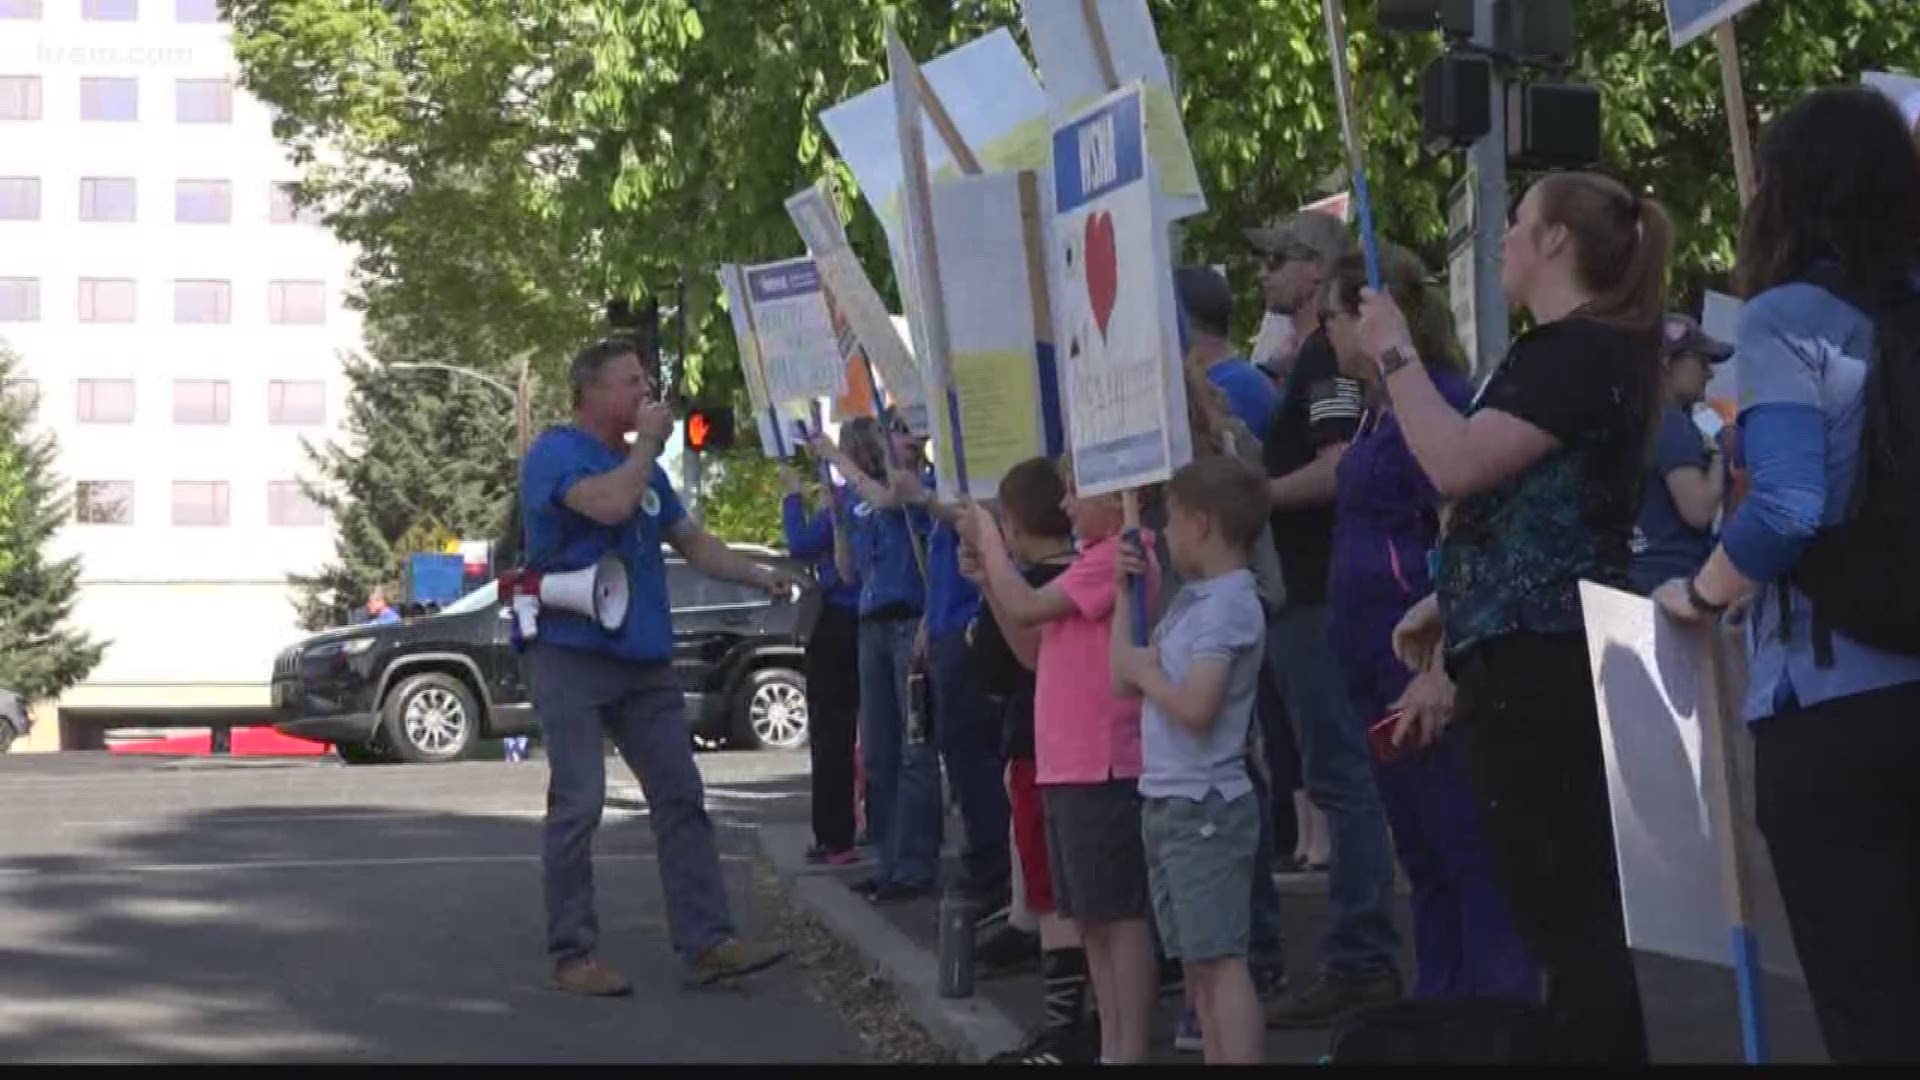 According to the Washington State Nurses Association, the nurses have been negotiating with Providence for months over nurse staffing and safe patient care with little progress.